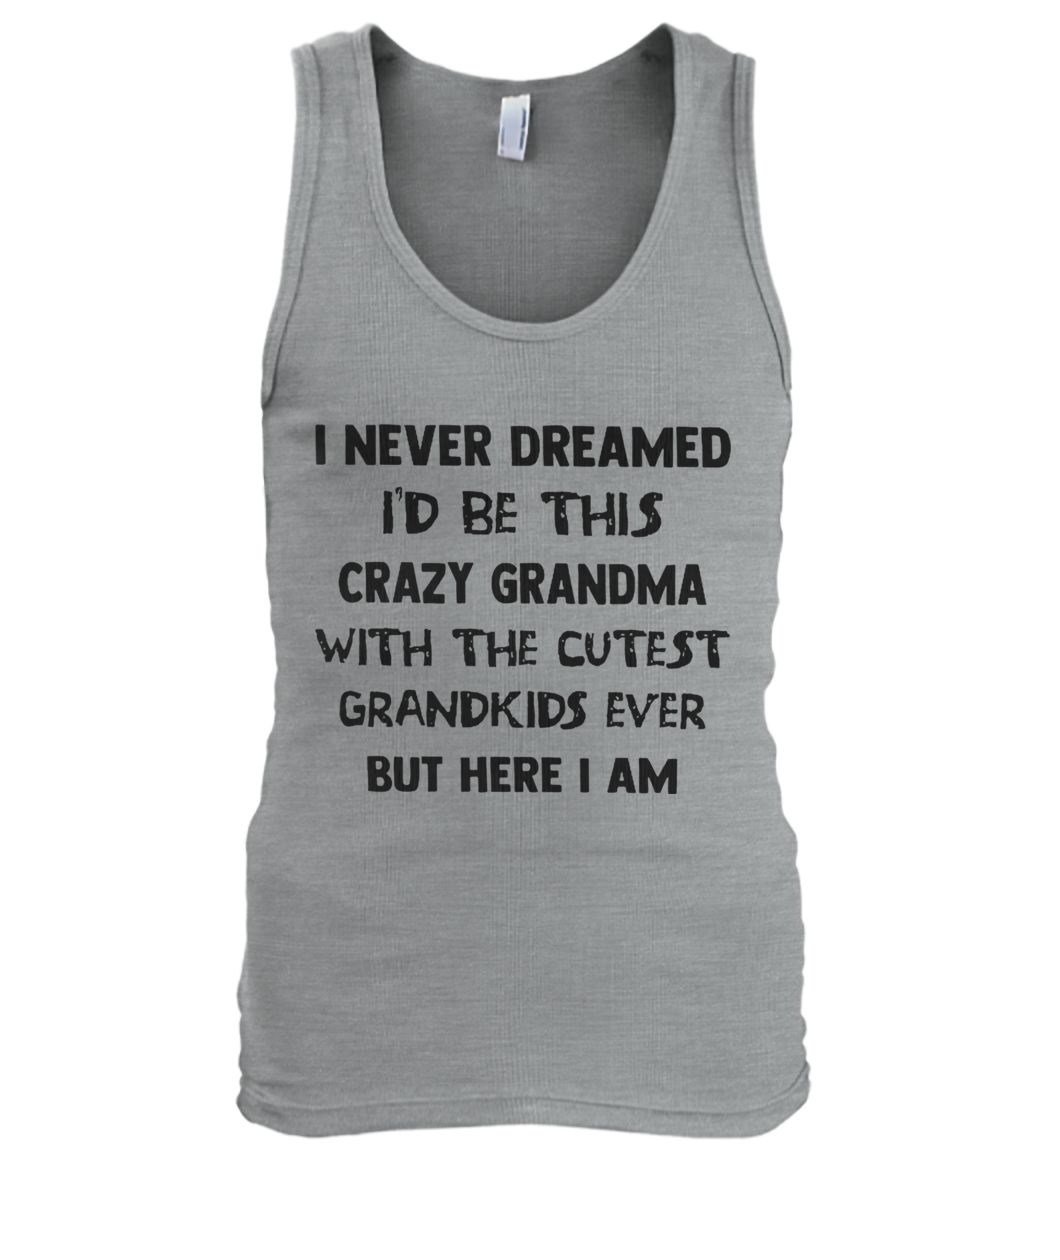 I never dreamed I'd be this crazy grandma with the cutest grandkids ever but here I am men's tank top